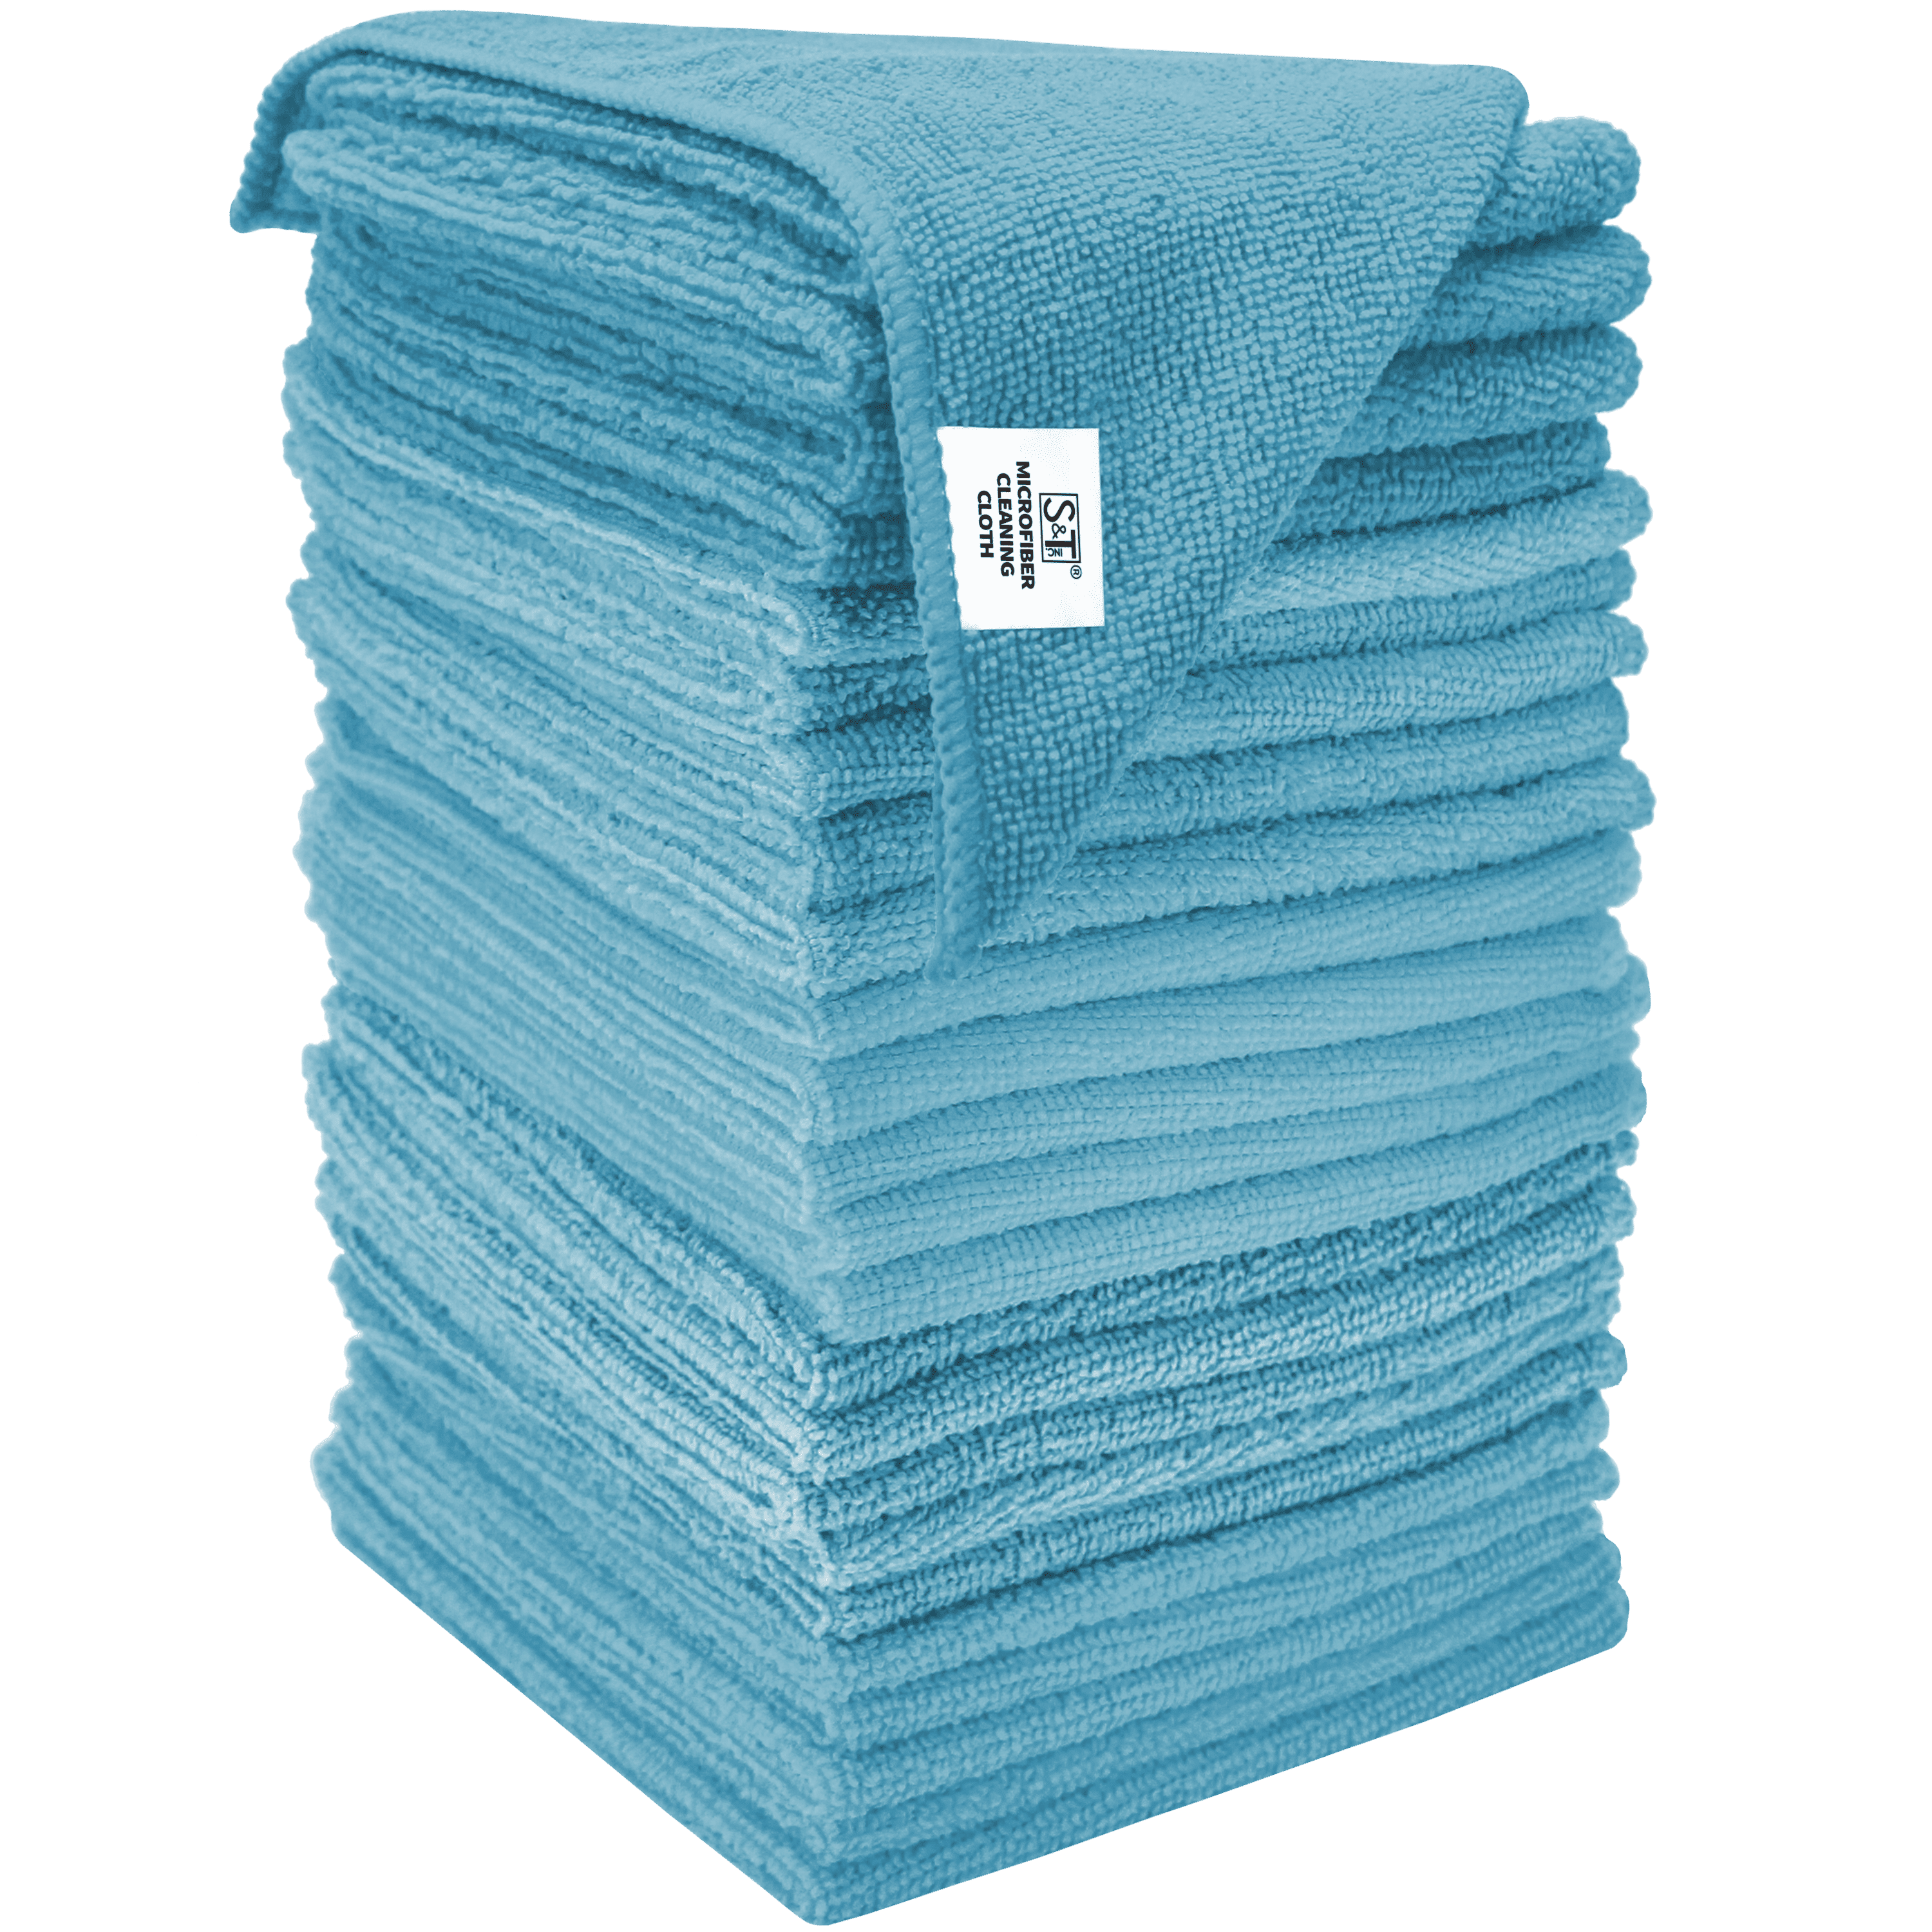 40 x 30 cm Car Cleaning Cloths 12-Pack House Microfiber Kitchen 